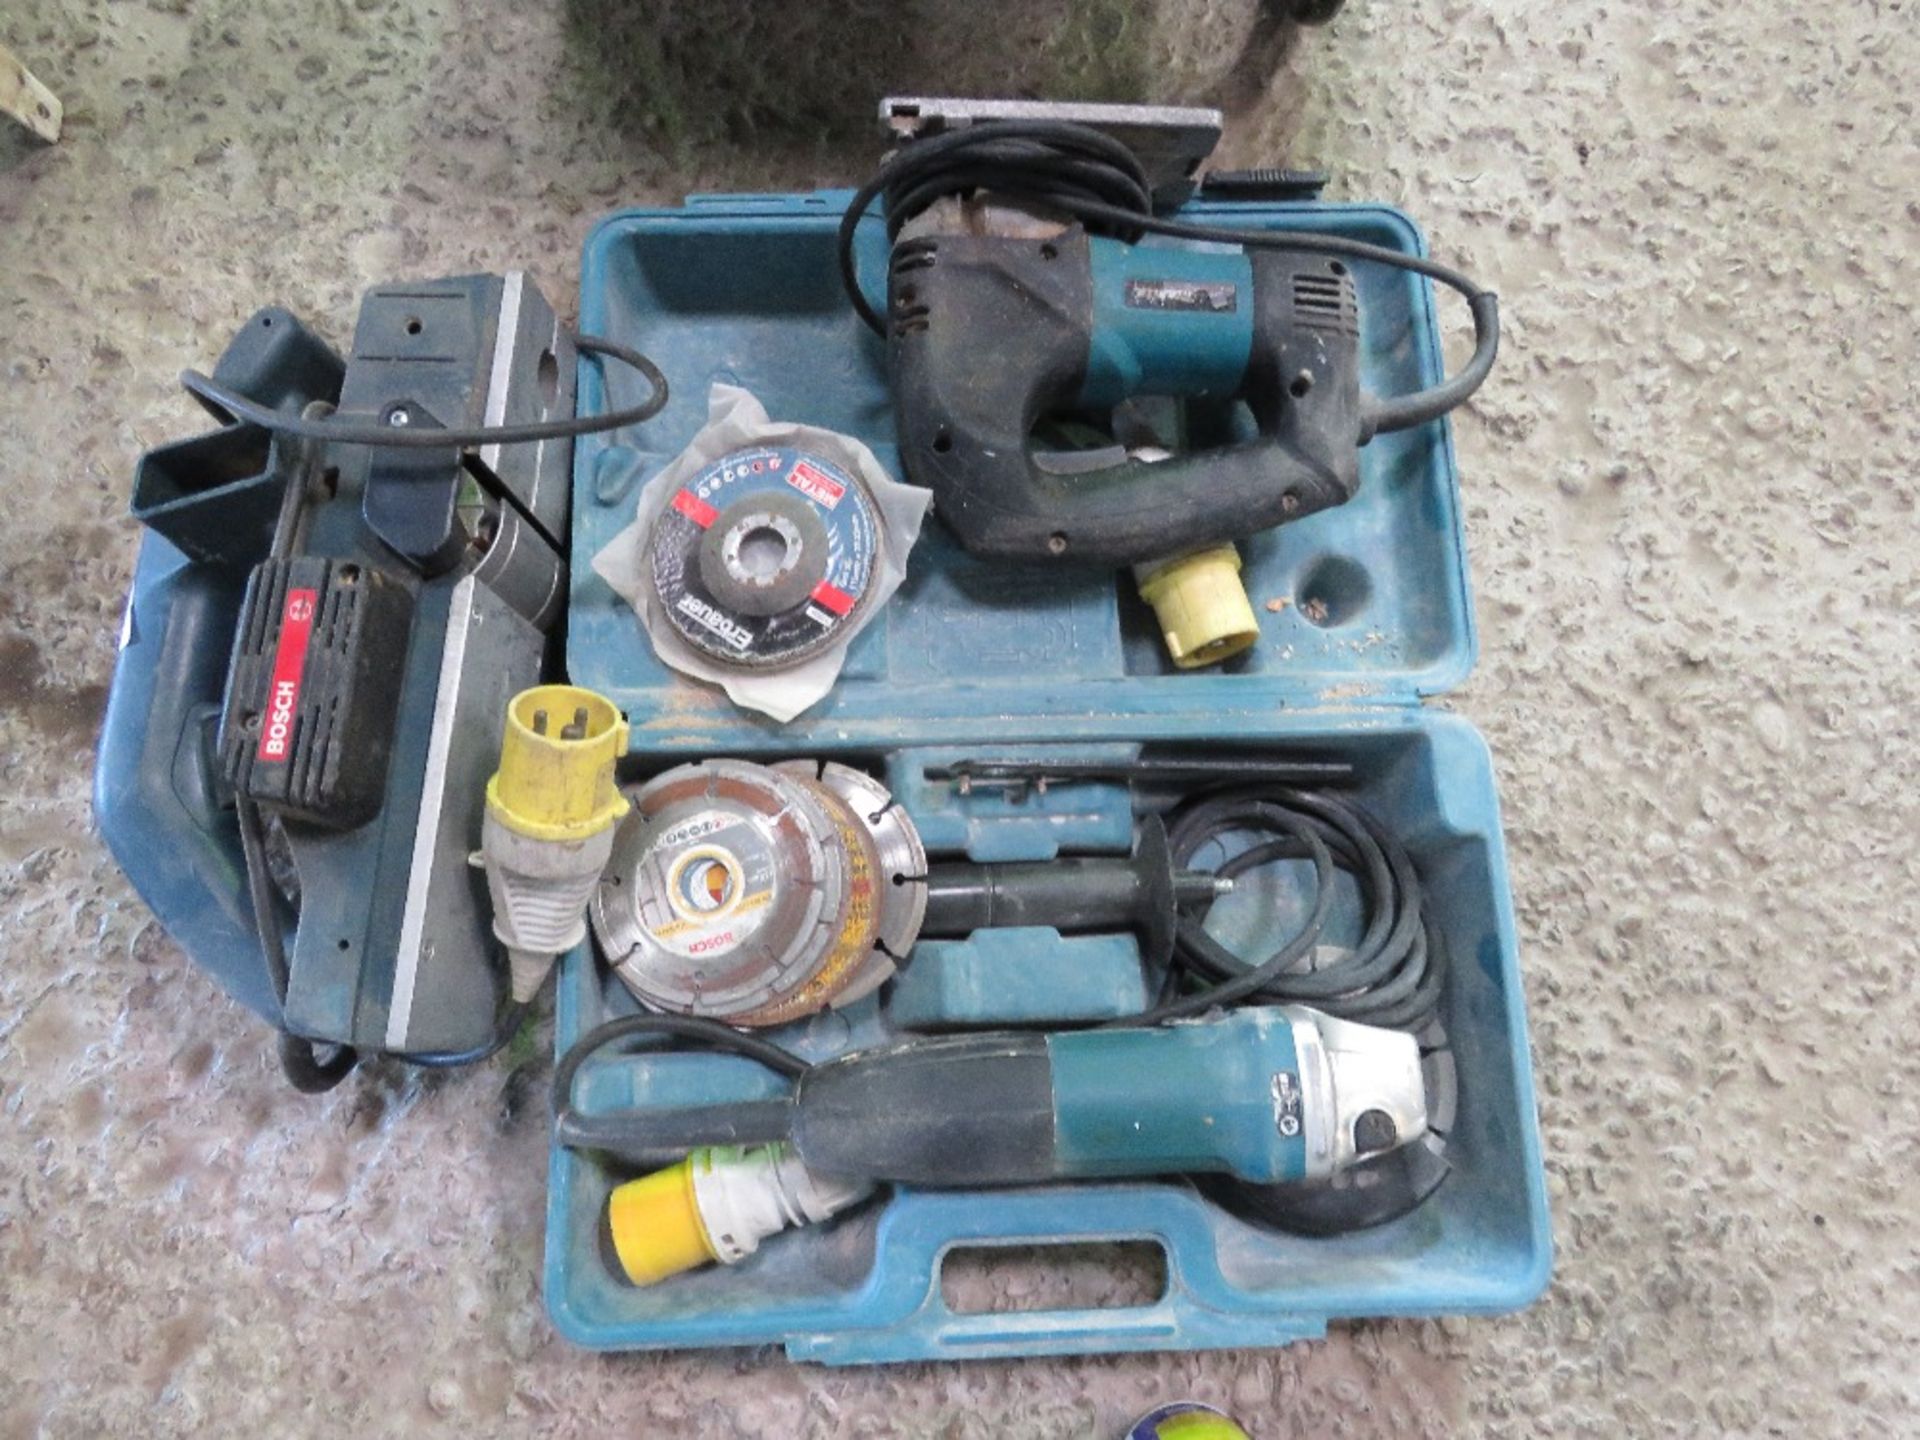 3 X 110VOLT POWER TOOLS: GRINDER, JIGSAW AND PLANER.DIRECT FROM COMPANY ADMINISTRATION. - Image 3 of 3